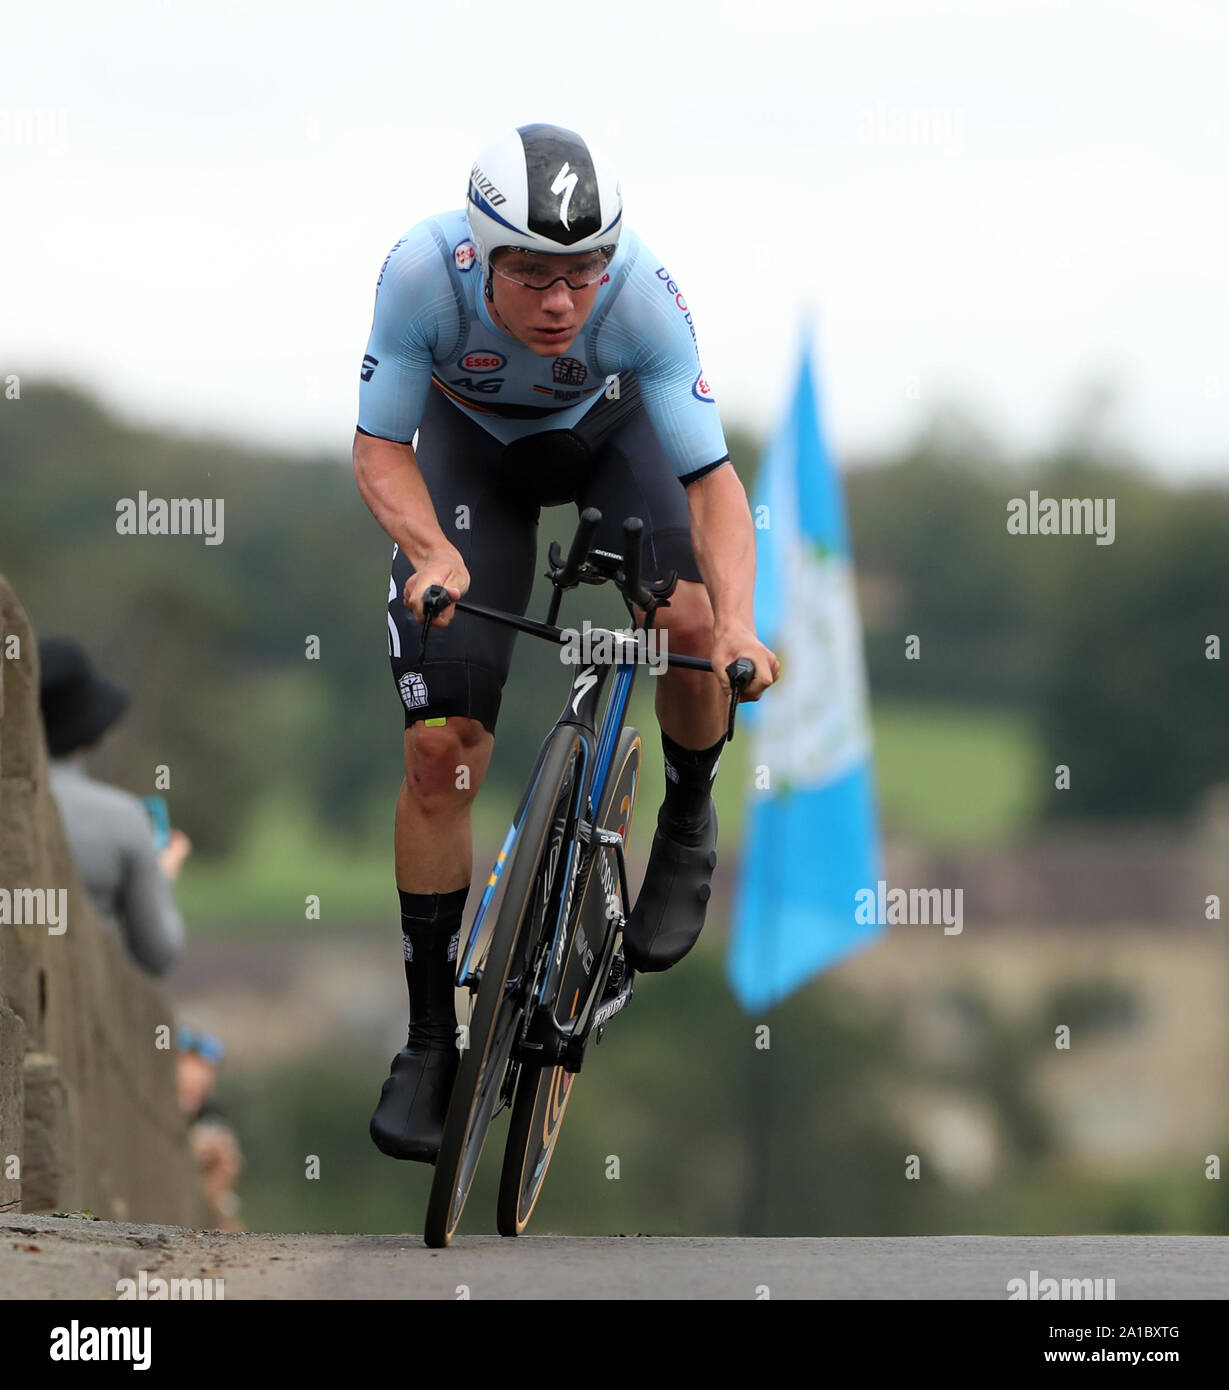 Remco Evenepoel High Resolution Stock Photography And Images Alamy